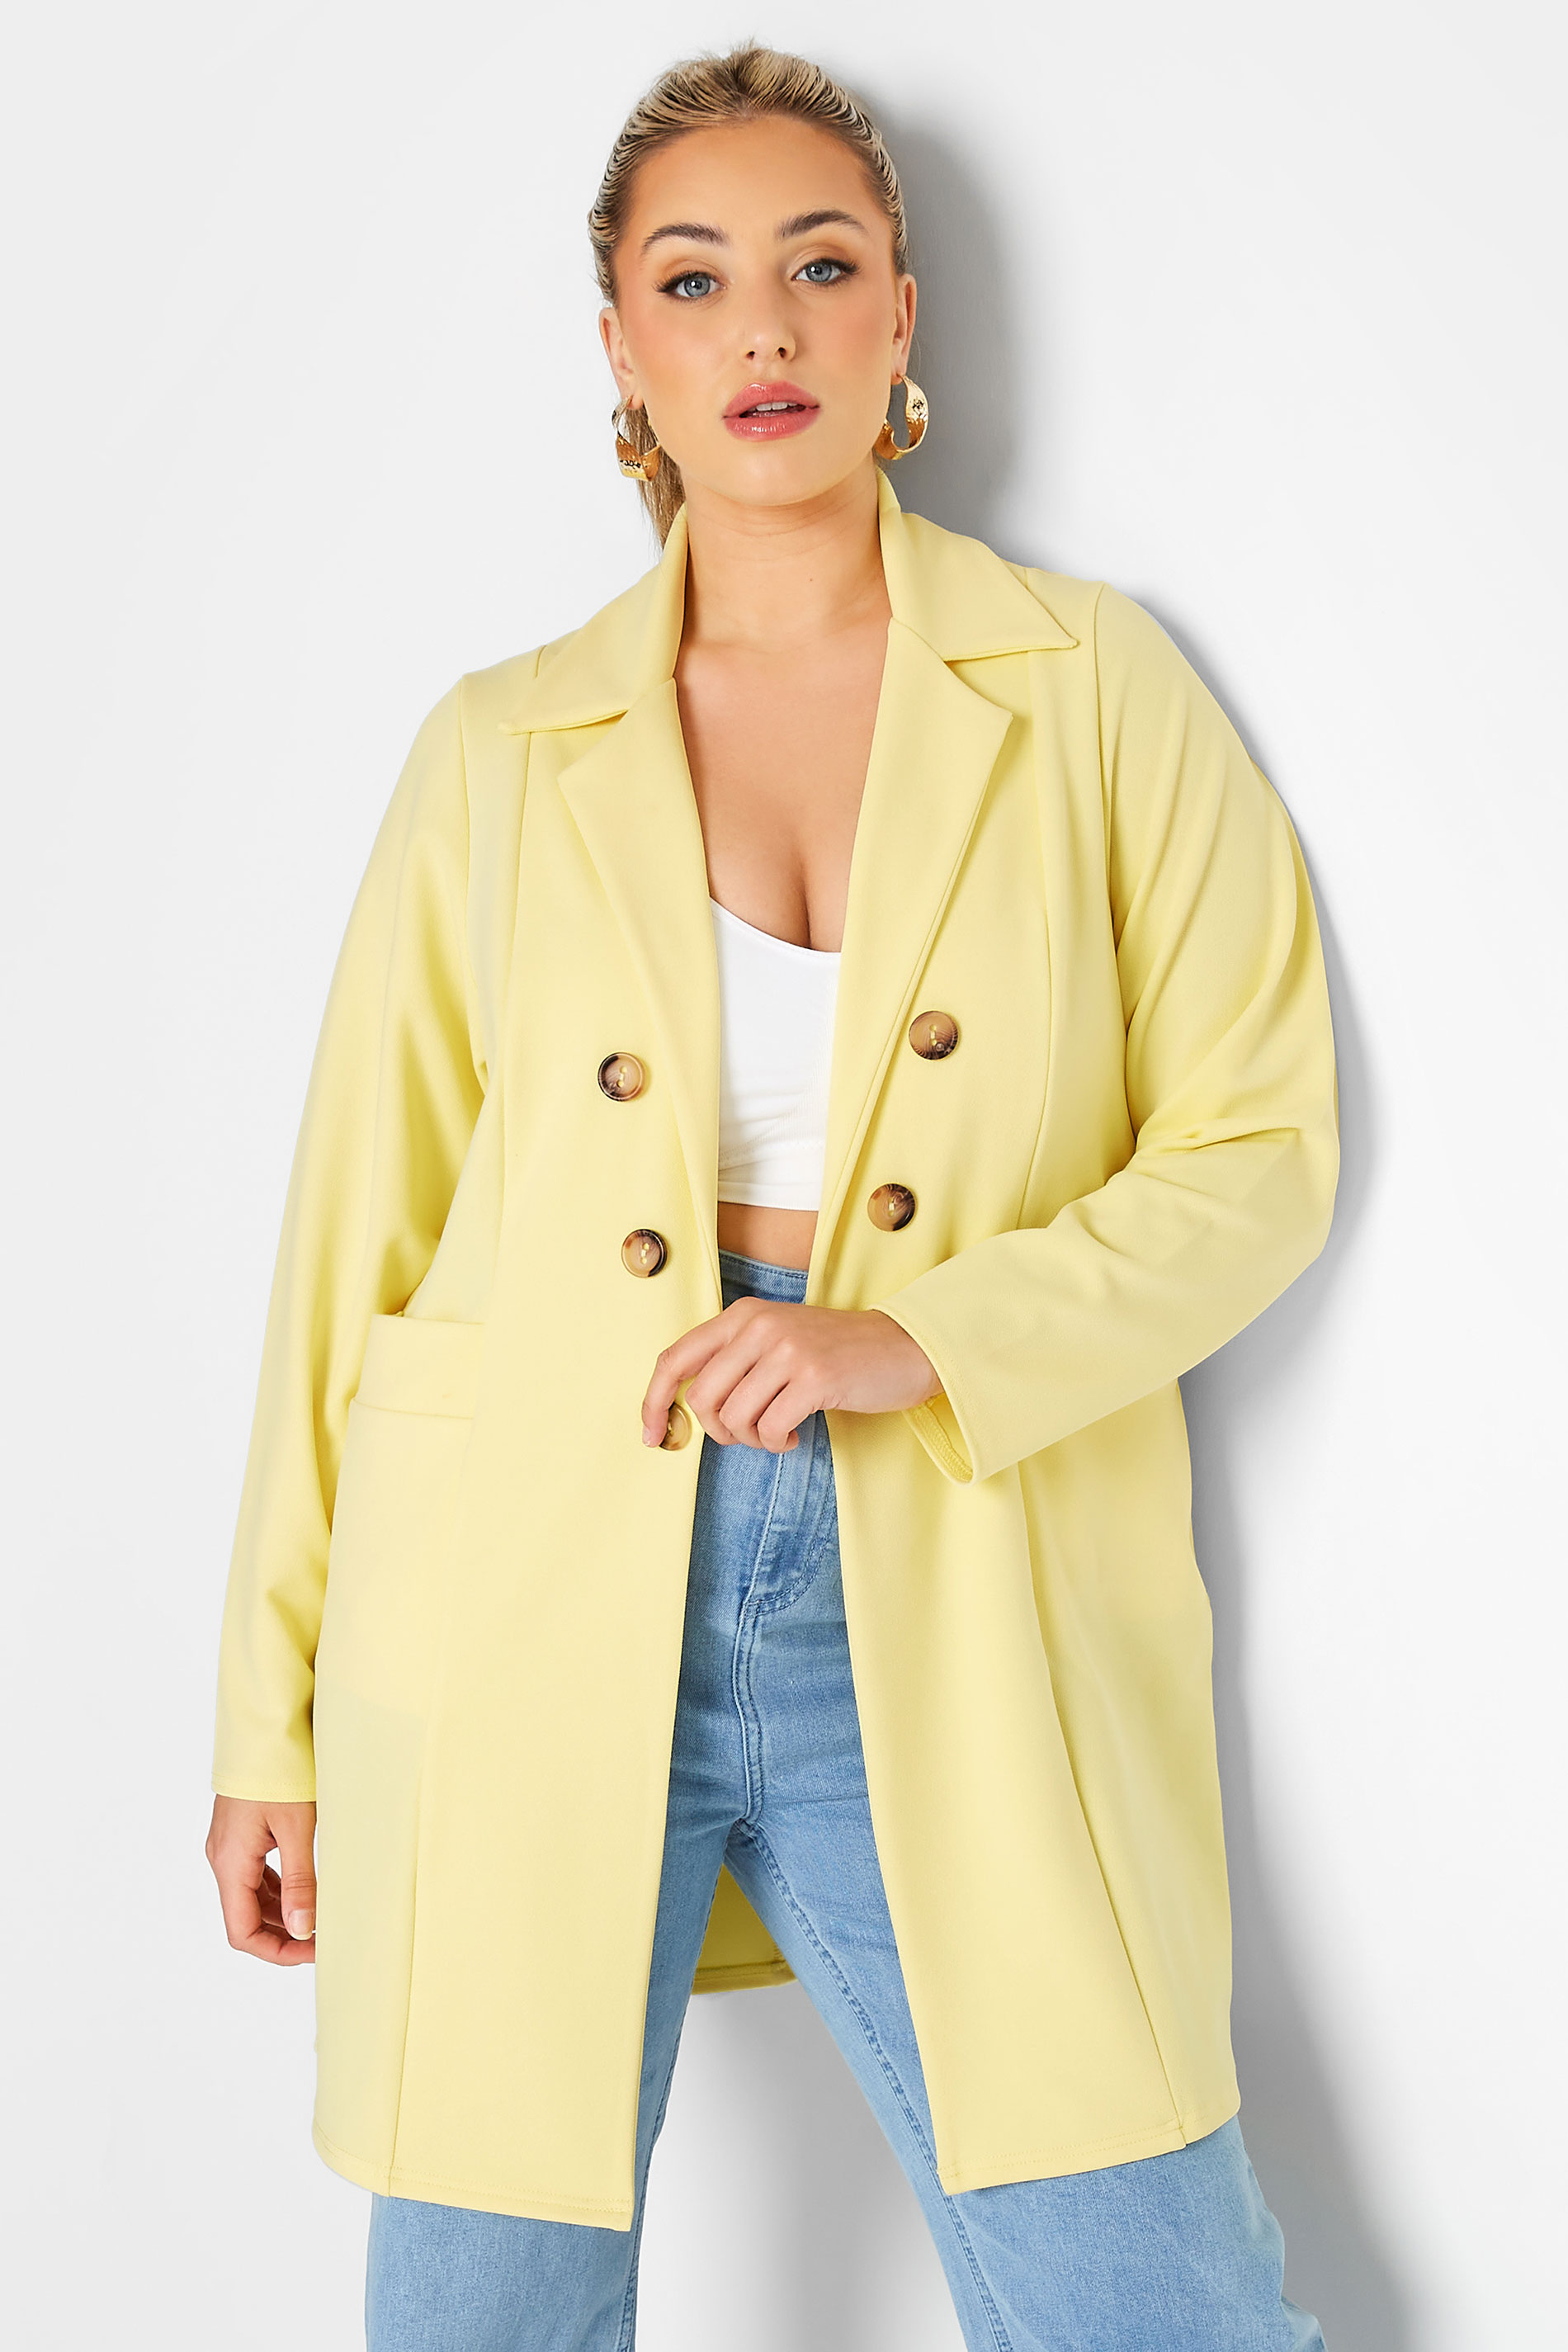 LIMITED COLLECTION Curve Lemon Yellow Button Front Blazer 1